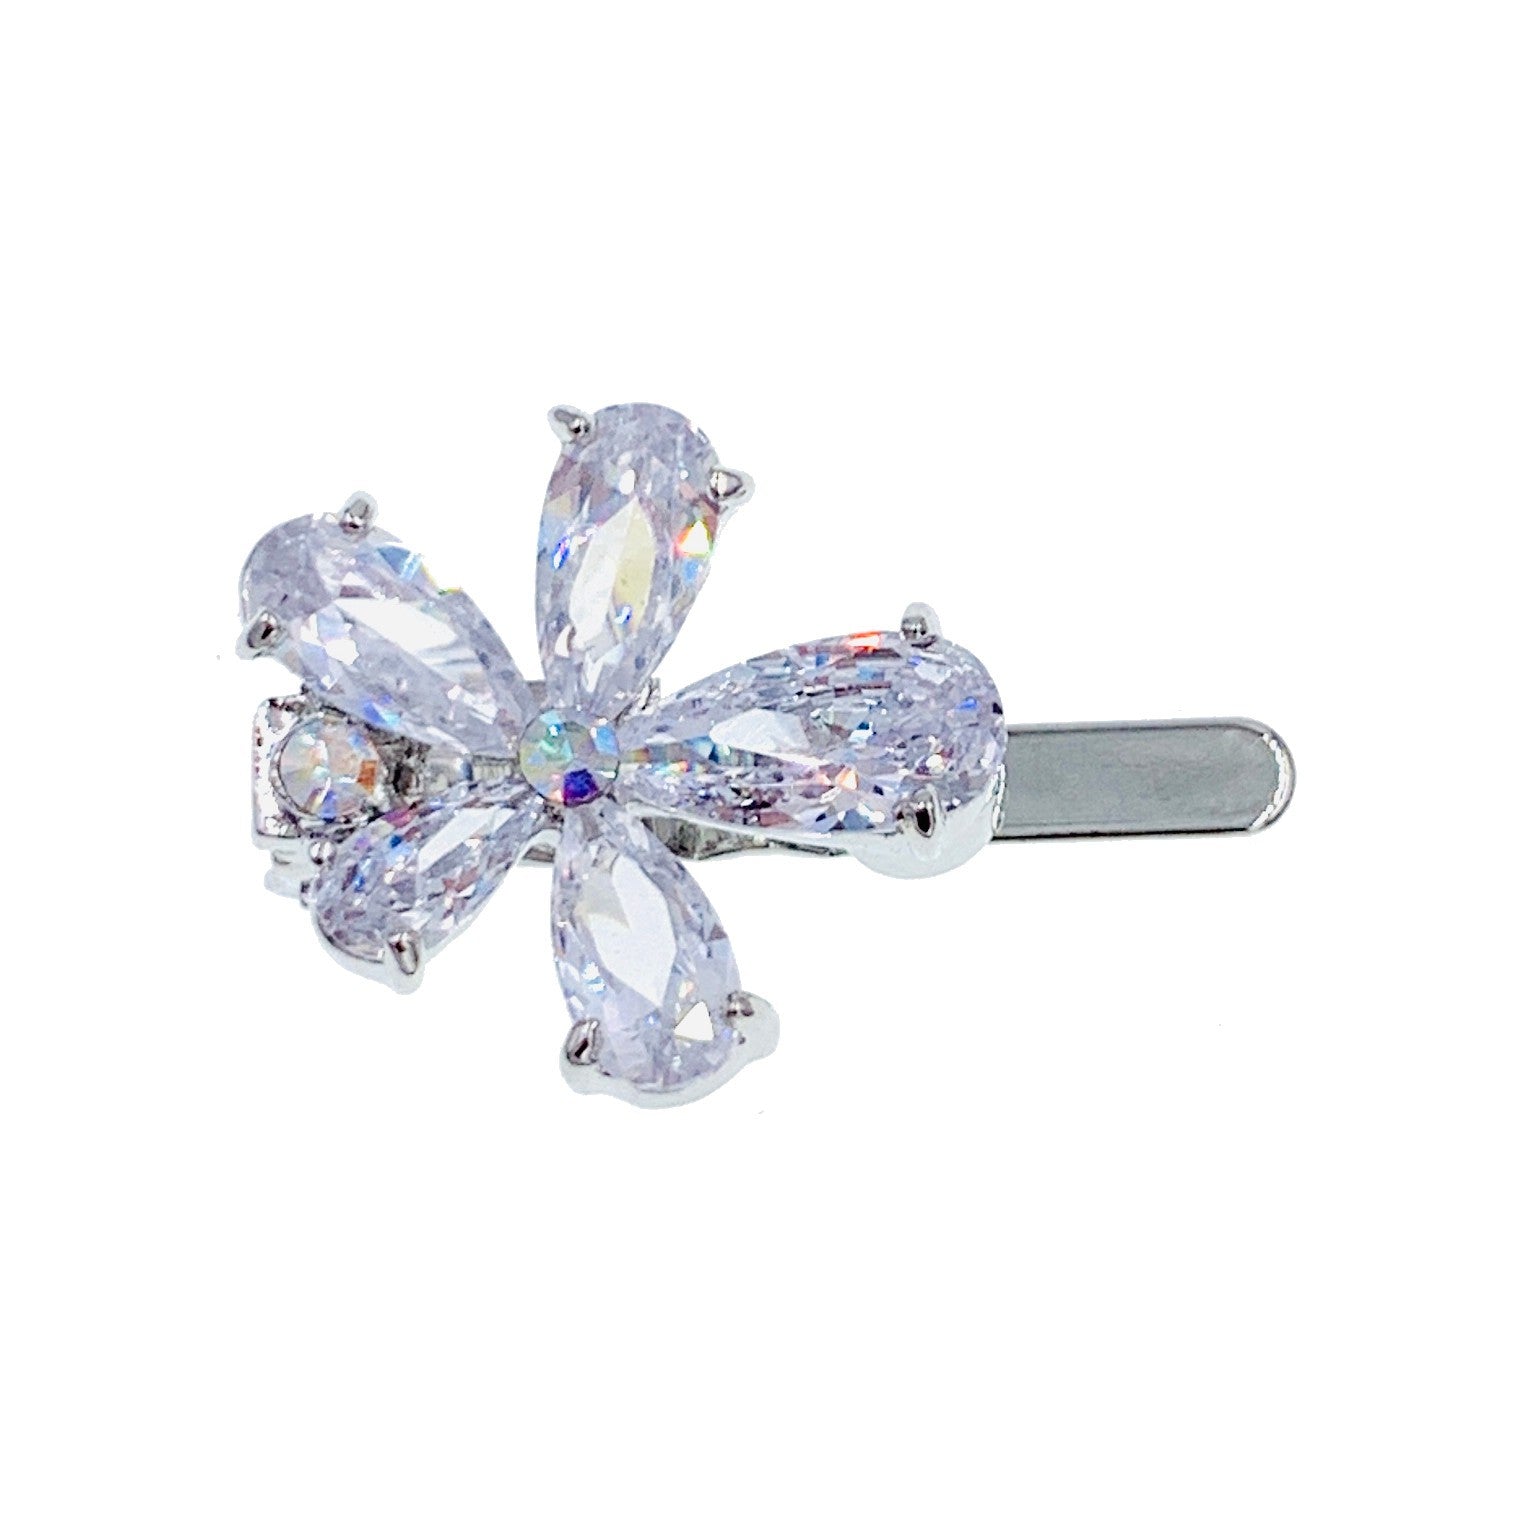 Parnassia Flower Magnetic Hair Clip Cubic Zirconia CZ Crystal Small Barrette, Magnetic Clip - MOGHANT